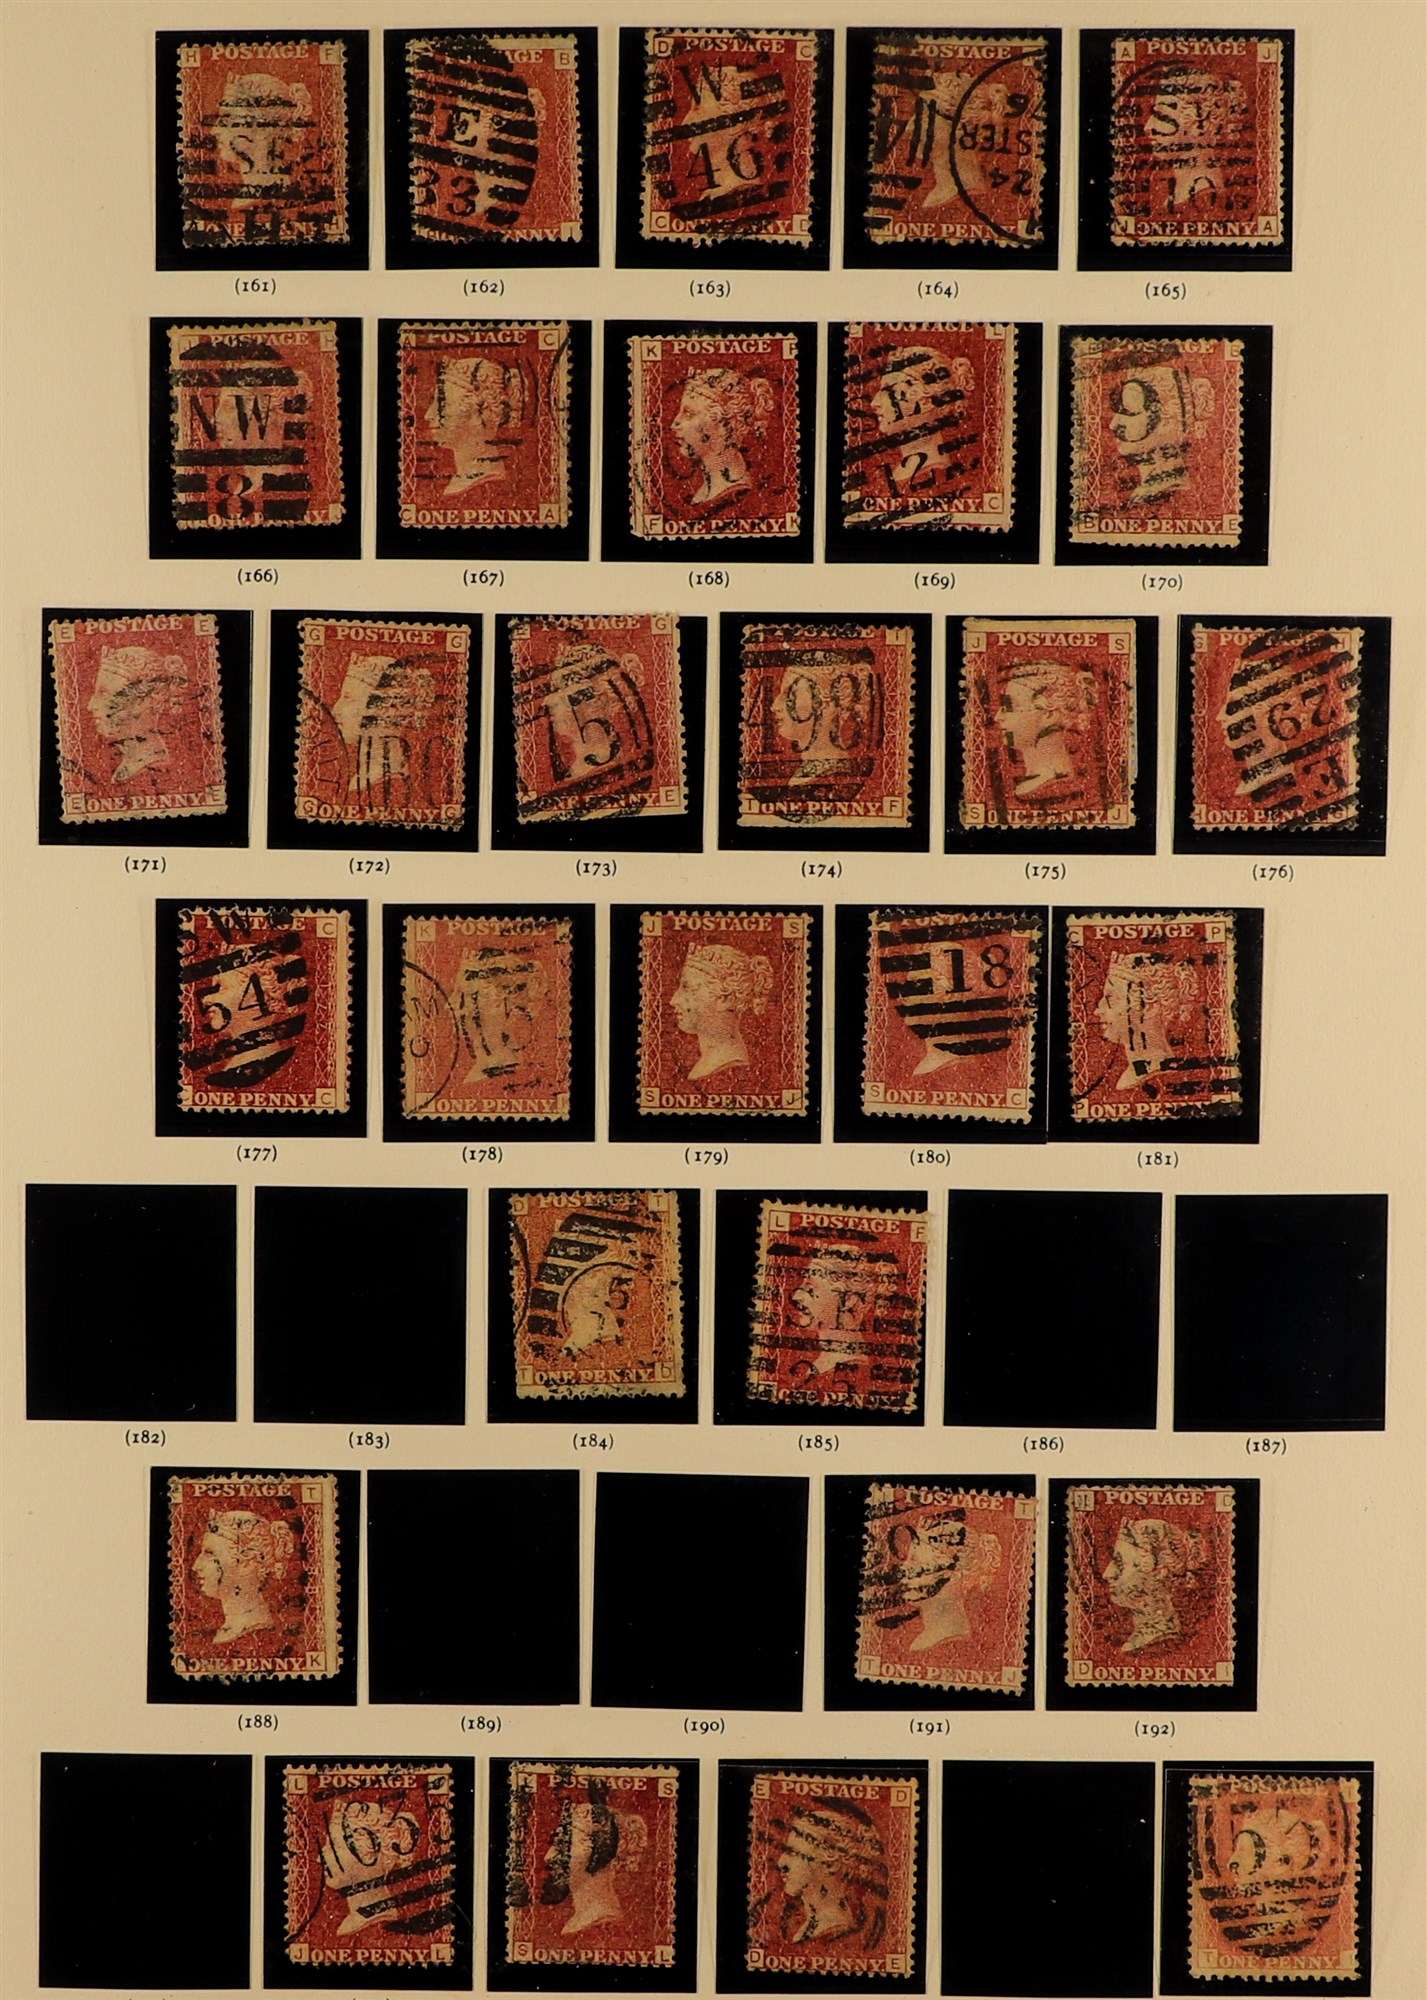 GREAT BRITAIN 1840-1980 COLLECTION Mint (later issues mostly never hinged) & used stamps in - Image 4 of 15